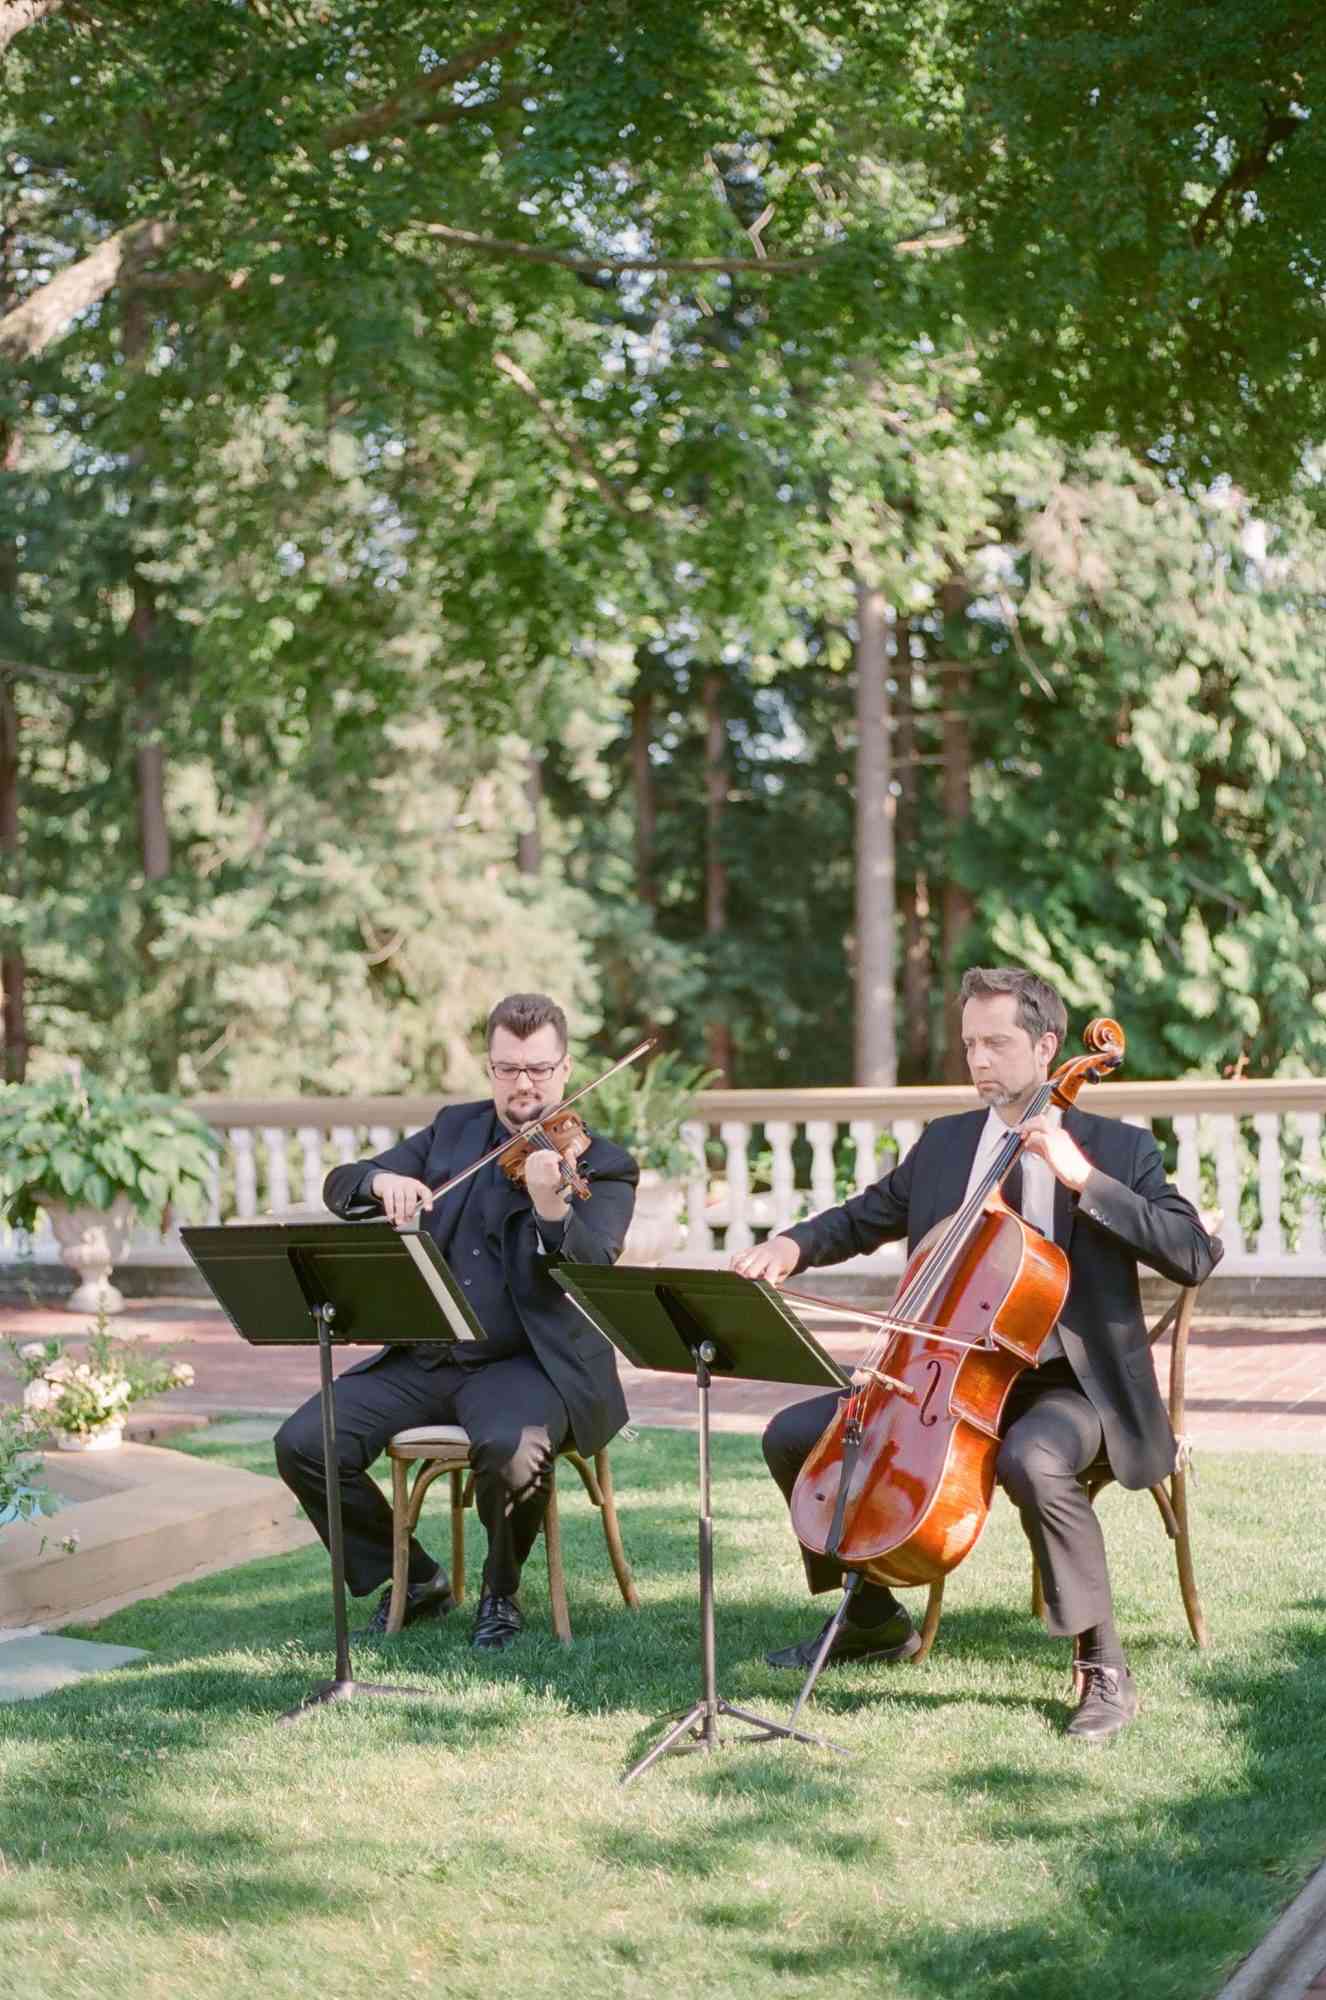 evelyn sam wedding musicians playing during ceremony